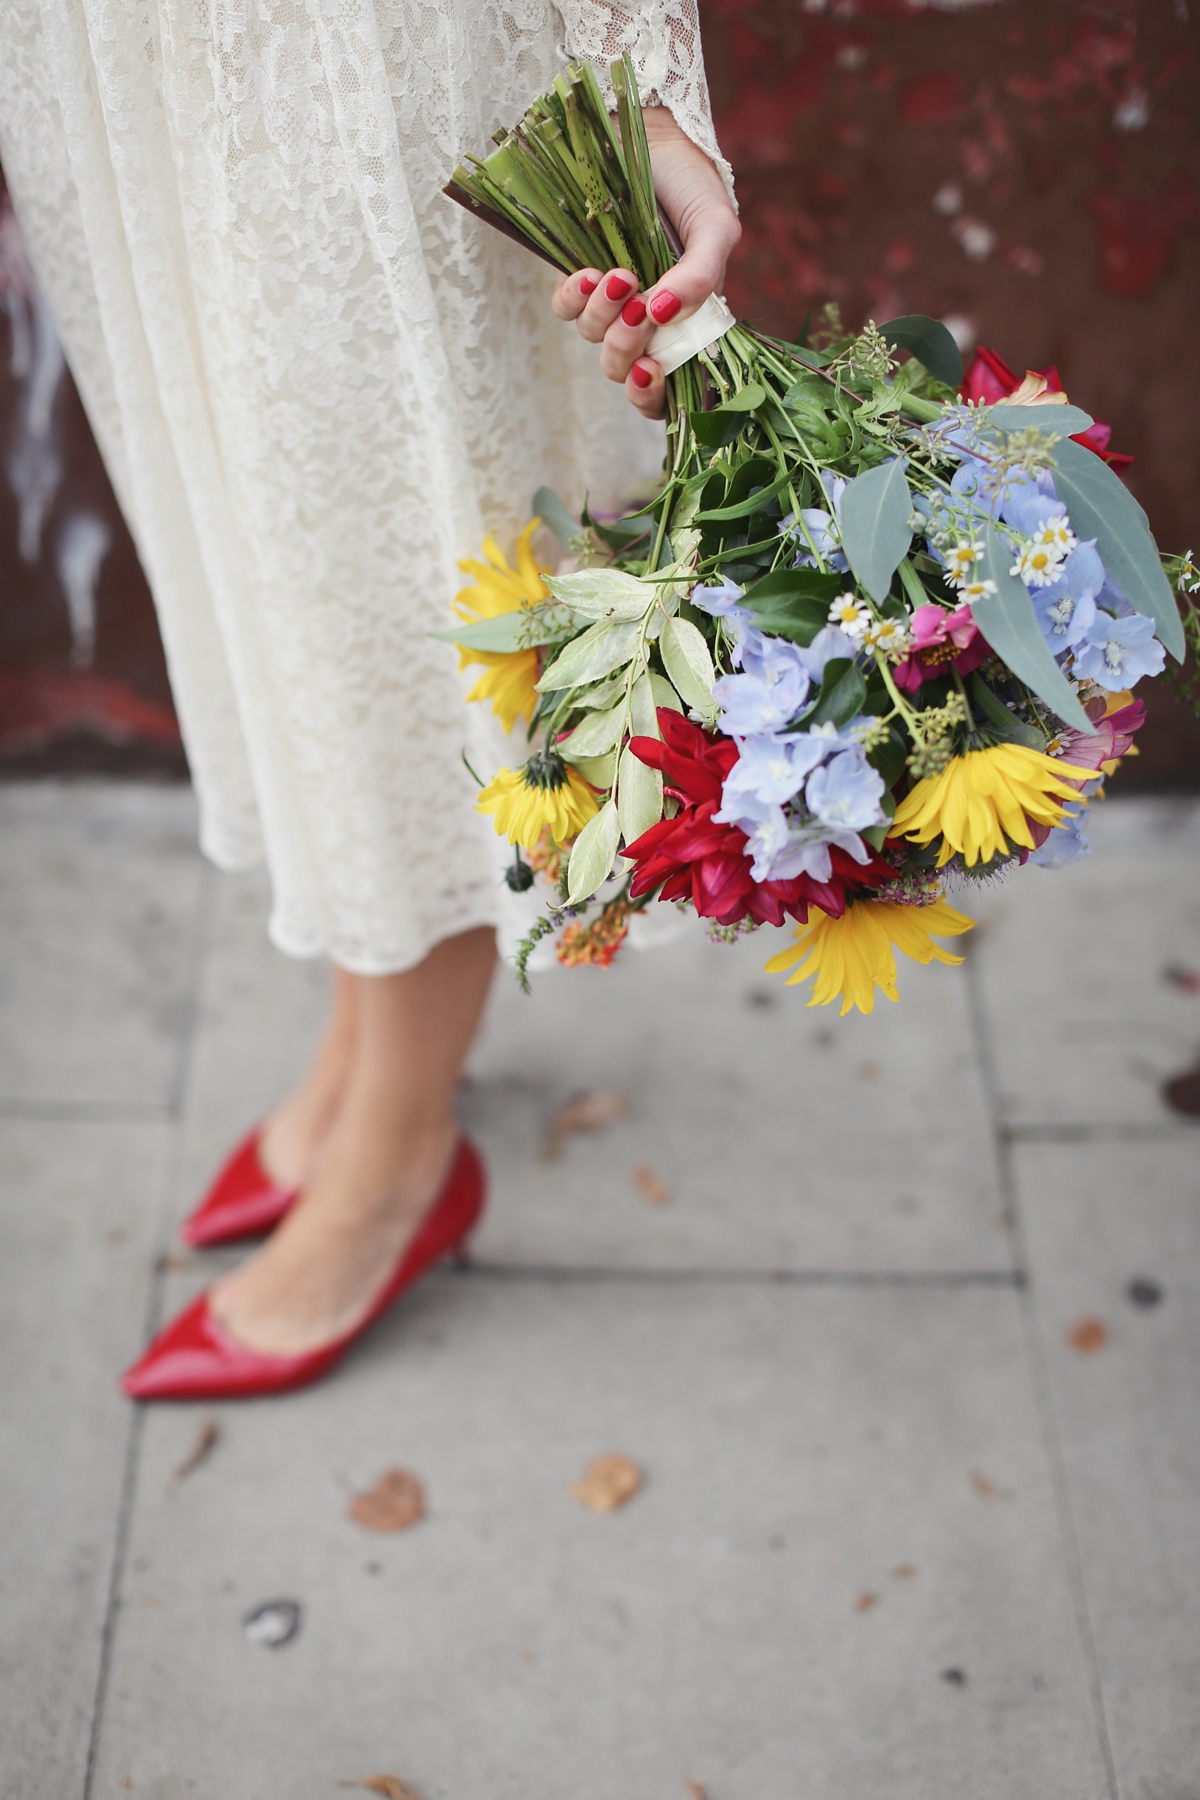 15 A vintage dress and colourful London wedding